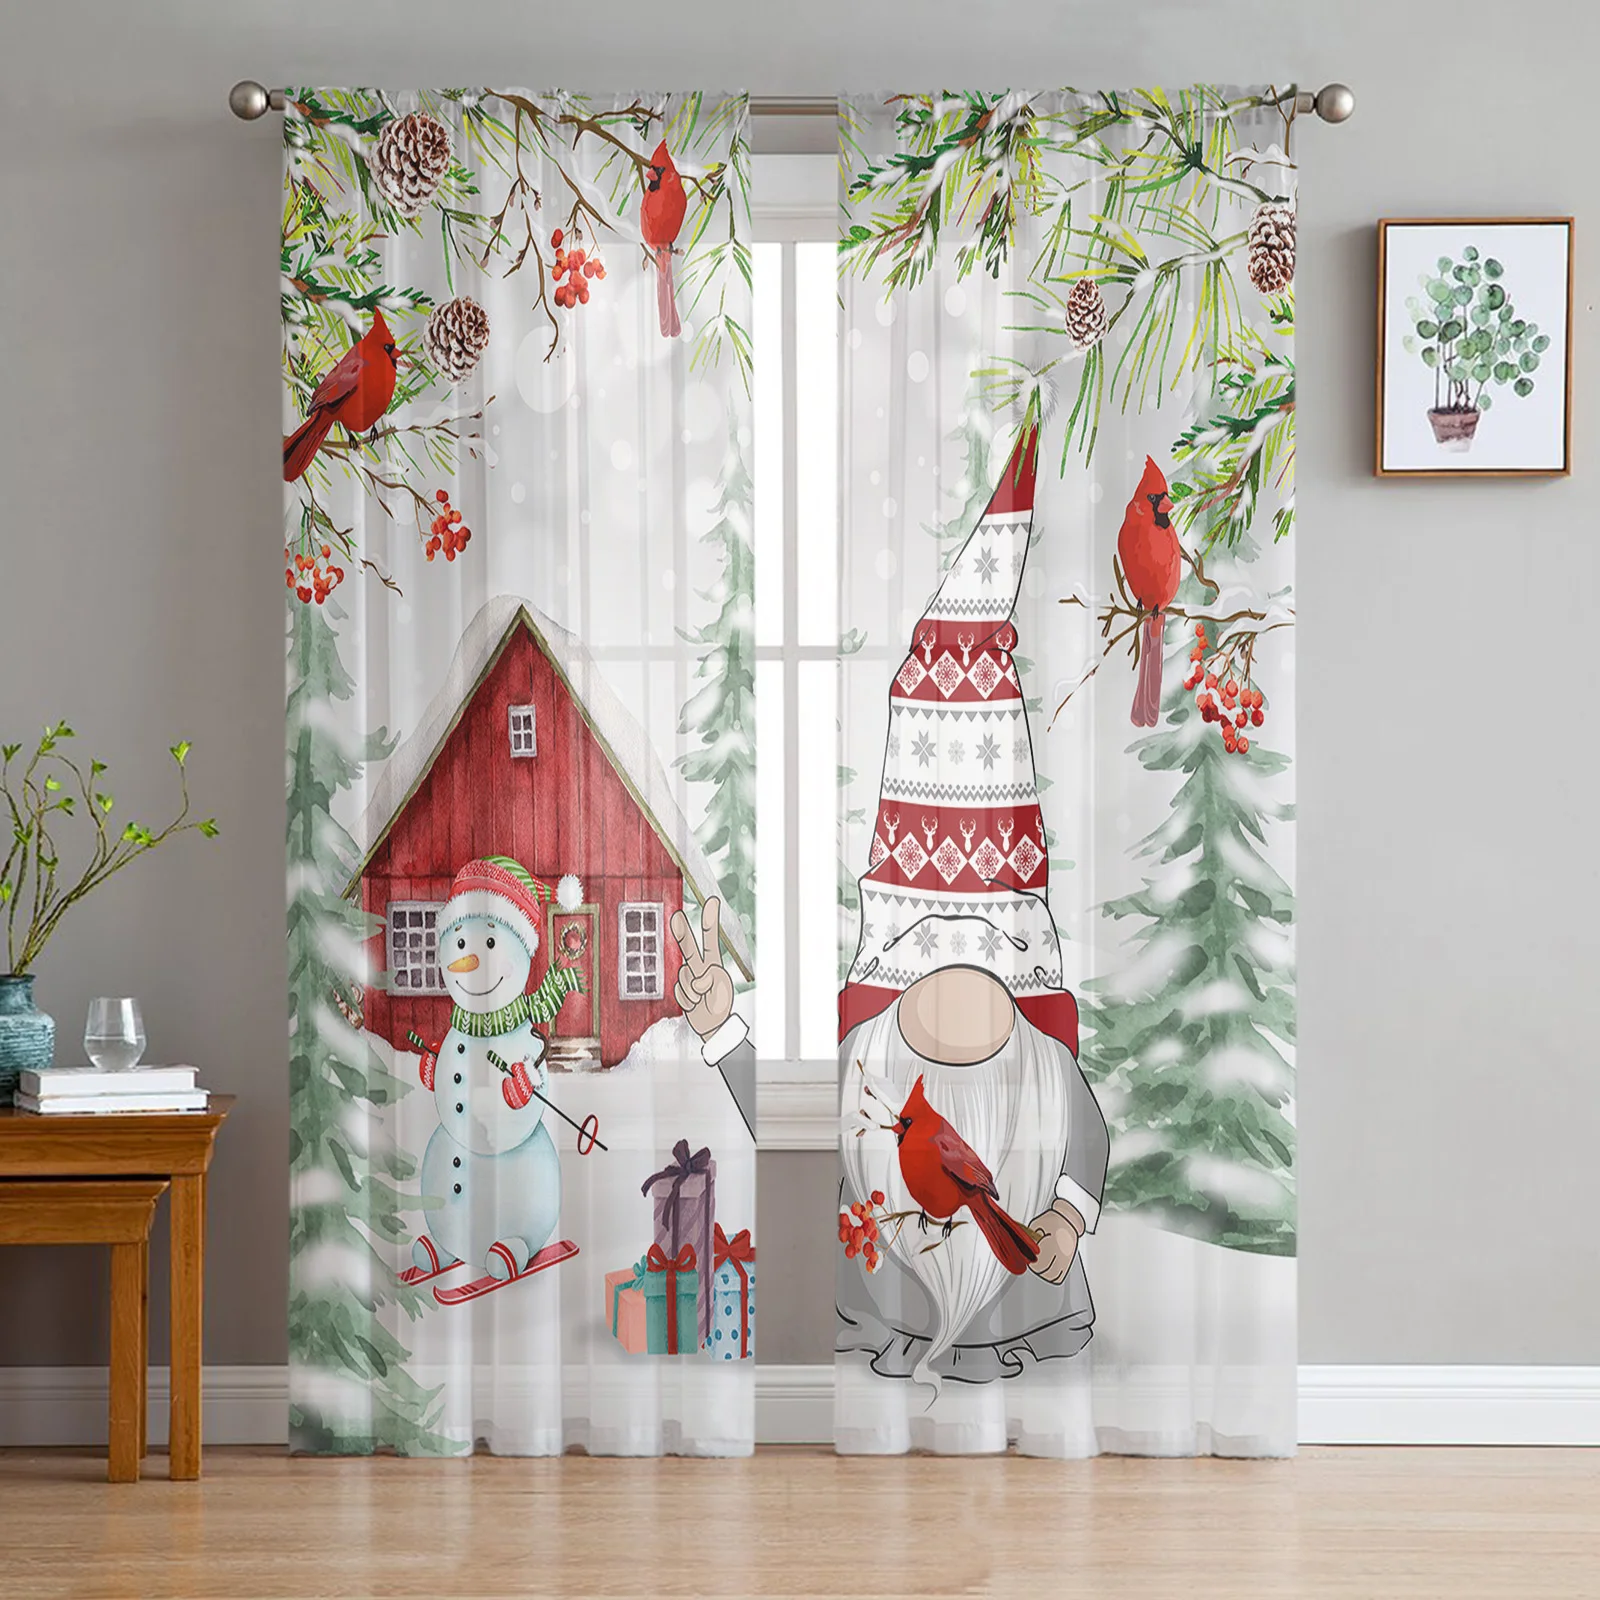 

Christmas Snowman Snow Scene Tulle Curtains for Living Room Bedroom Decoration Transparent Chiffon Sheer Voile Window Curtain